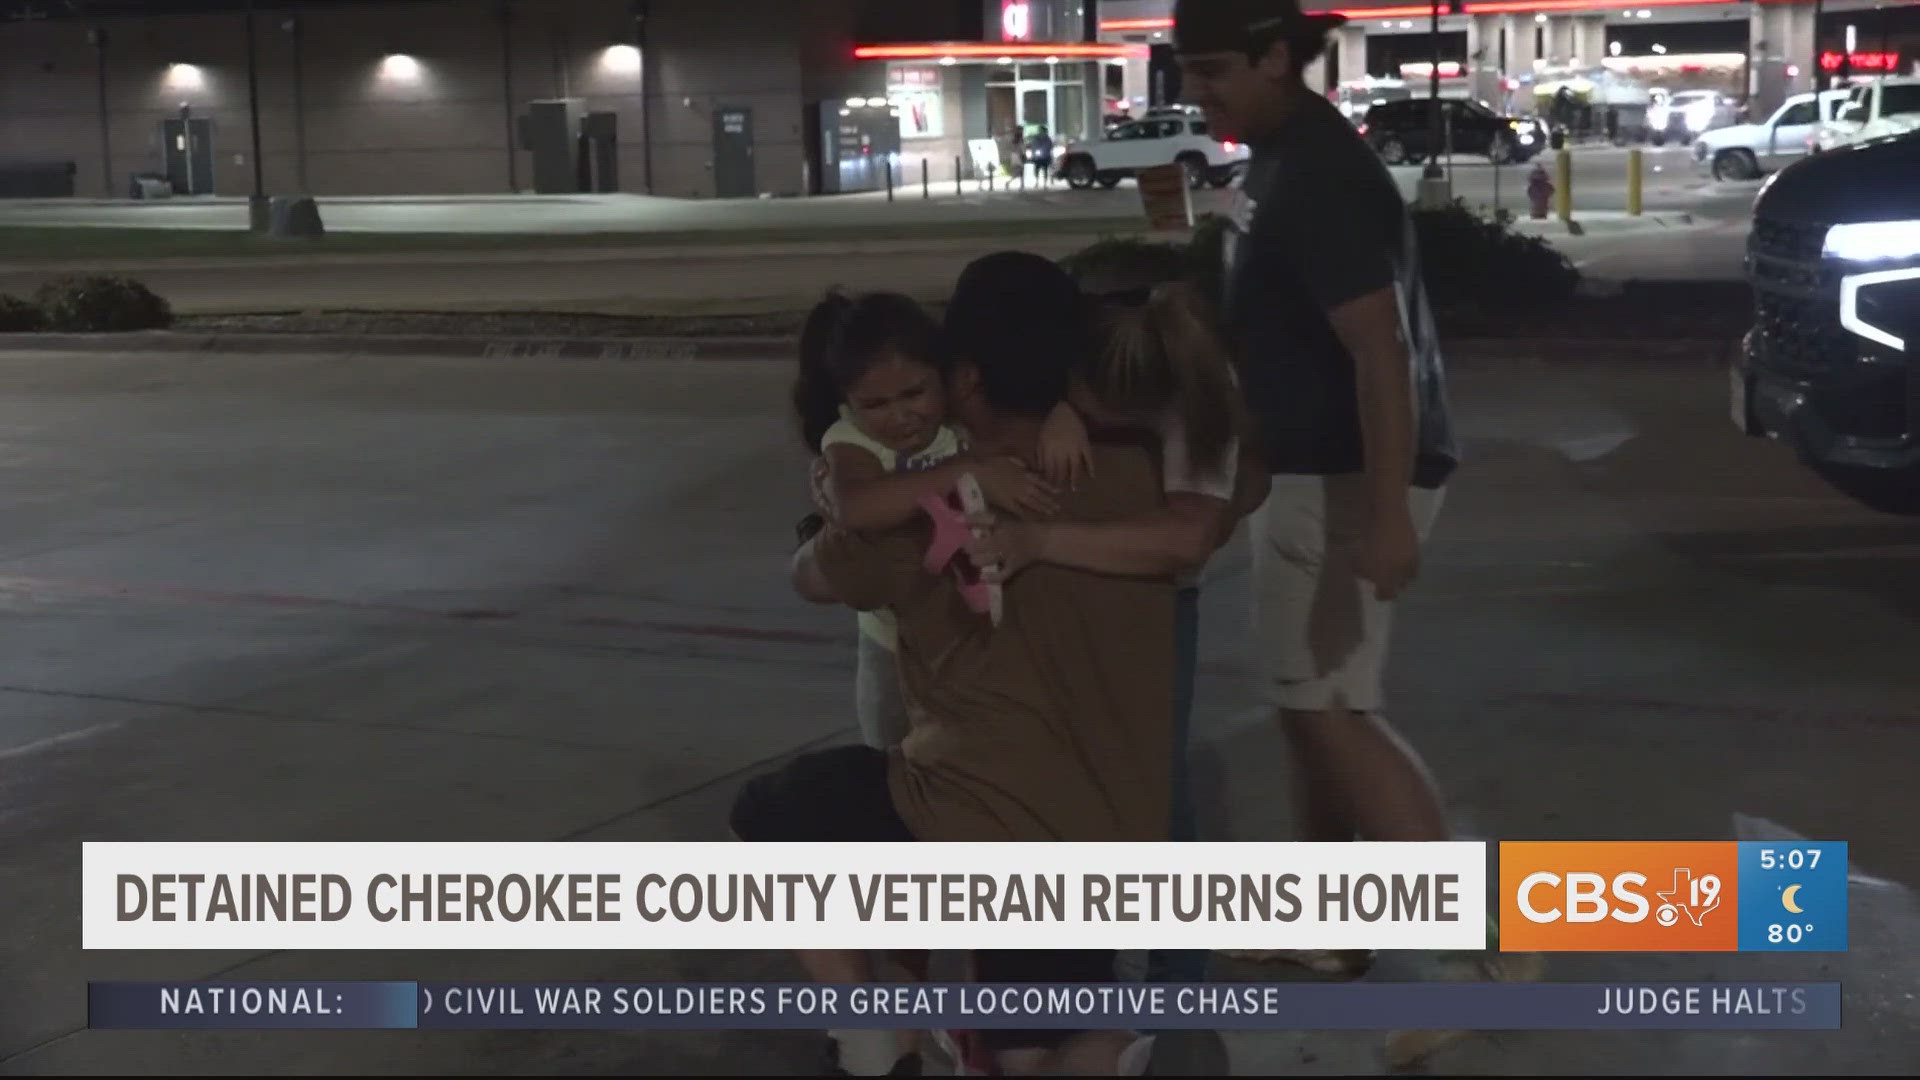 After almost a week in the facility, Torres was released Wednesday evening and CBS19 was there for the emotional reunion with his family.